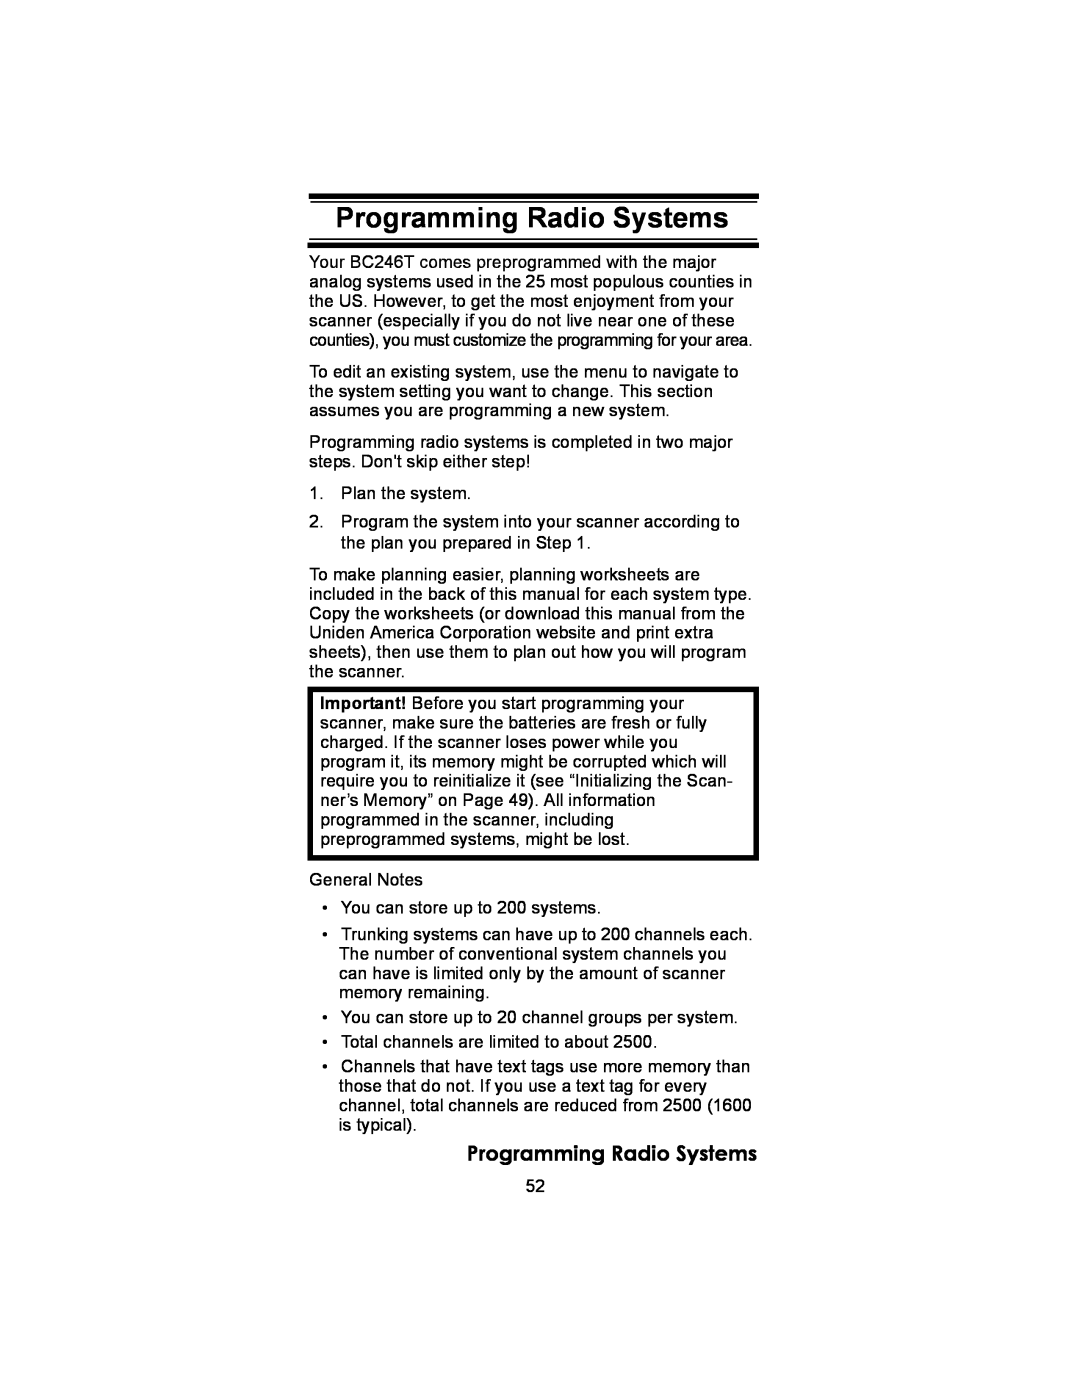 Uniden BC246T owner manual Programming Radio Systems 